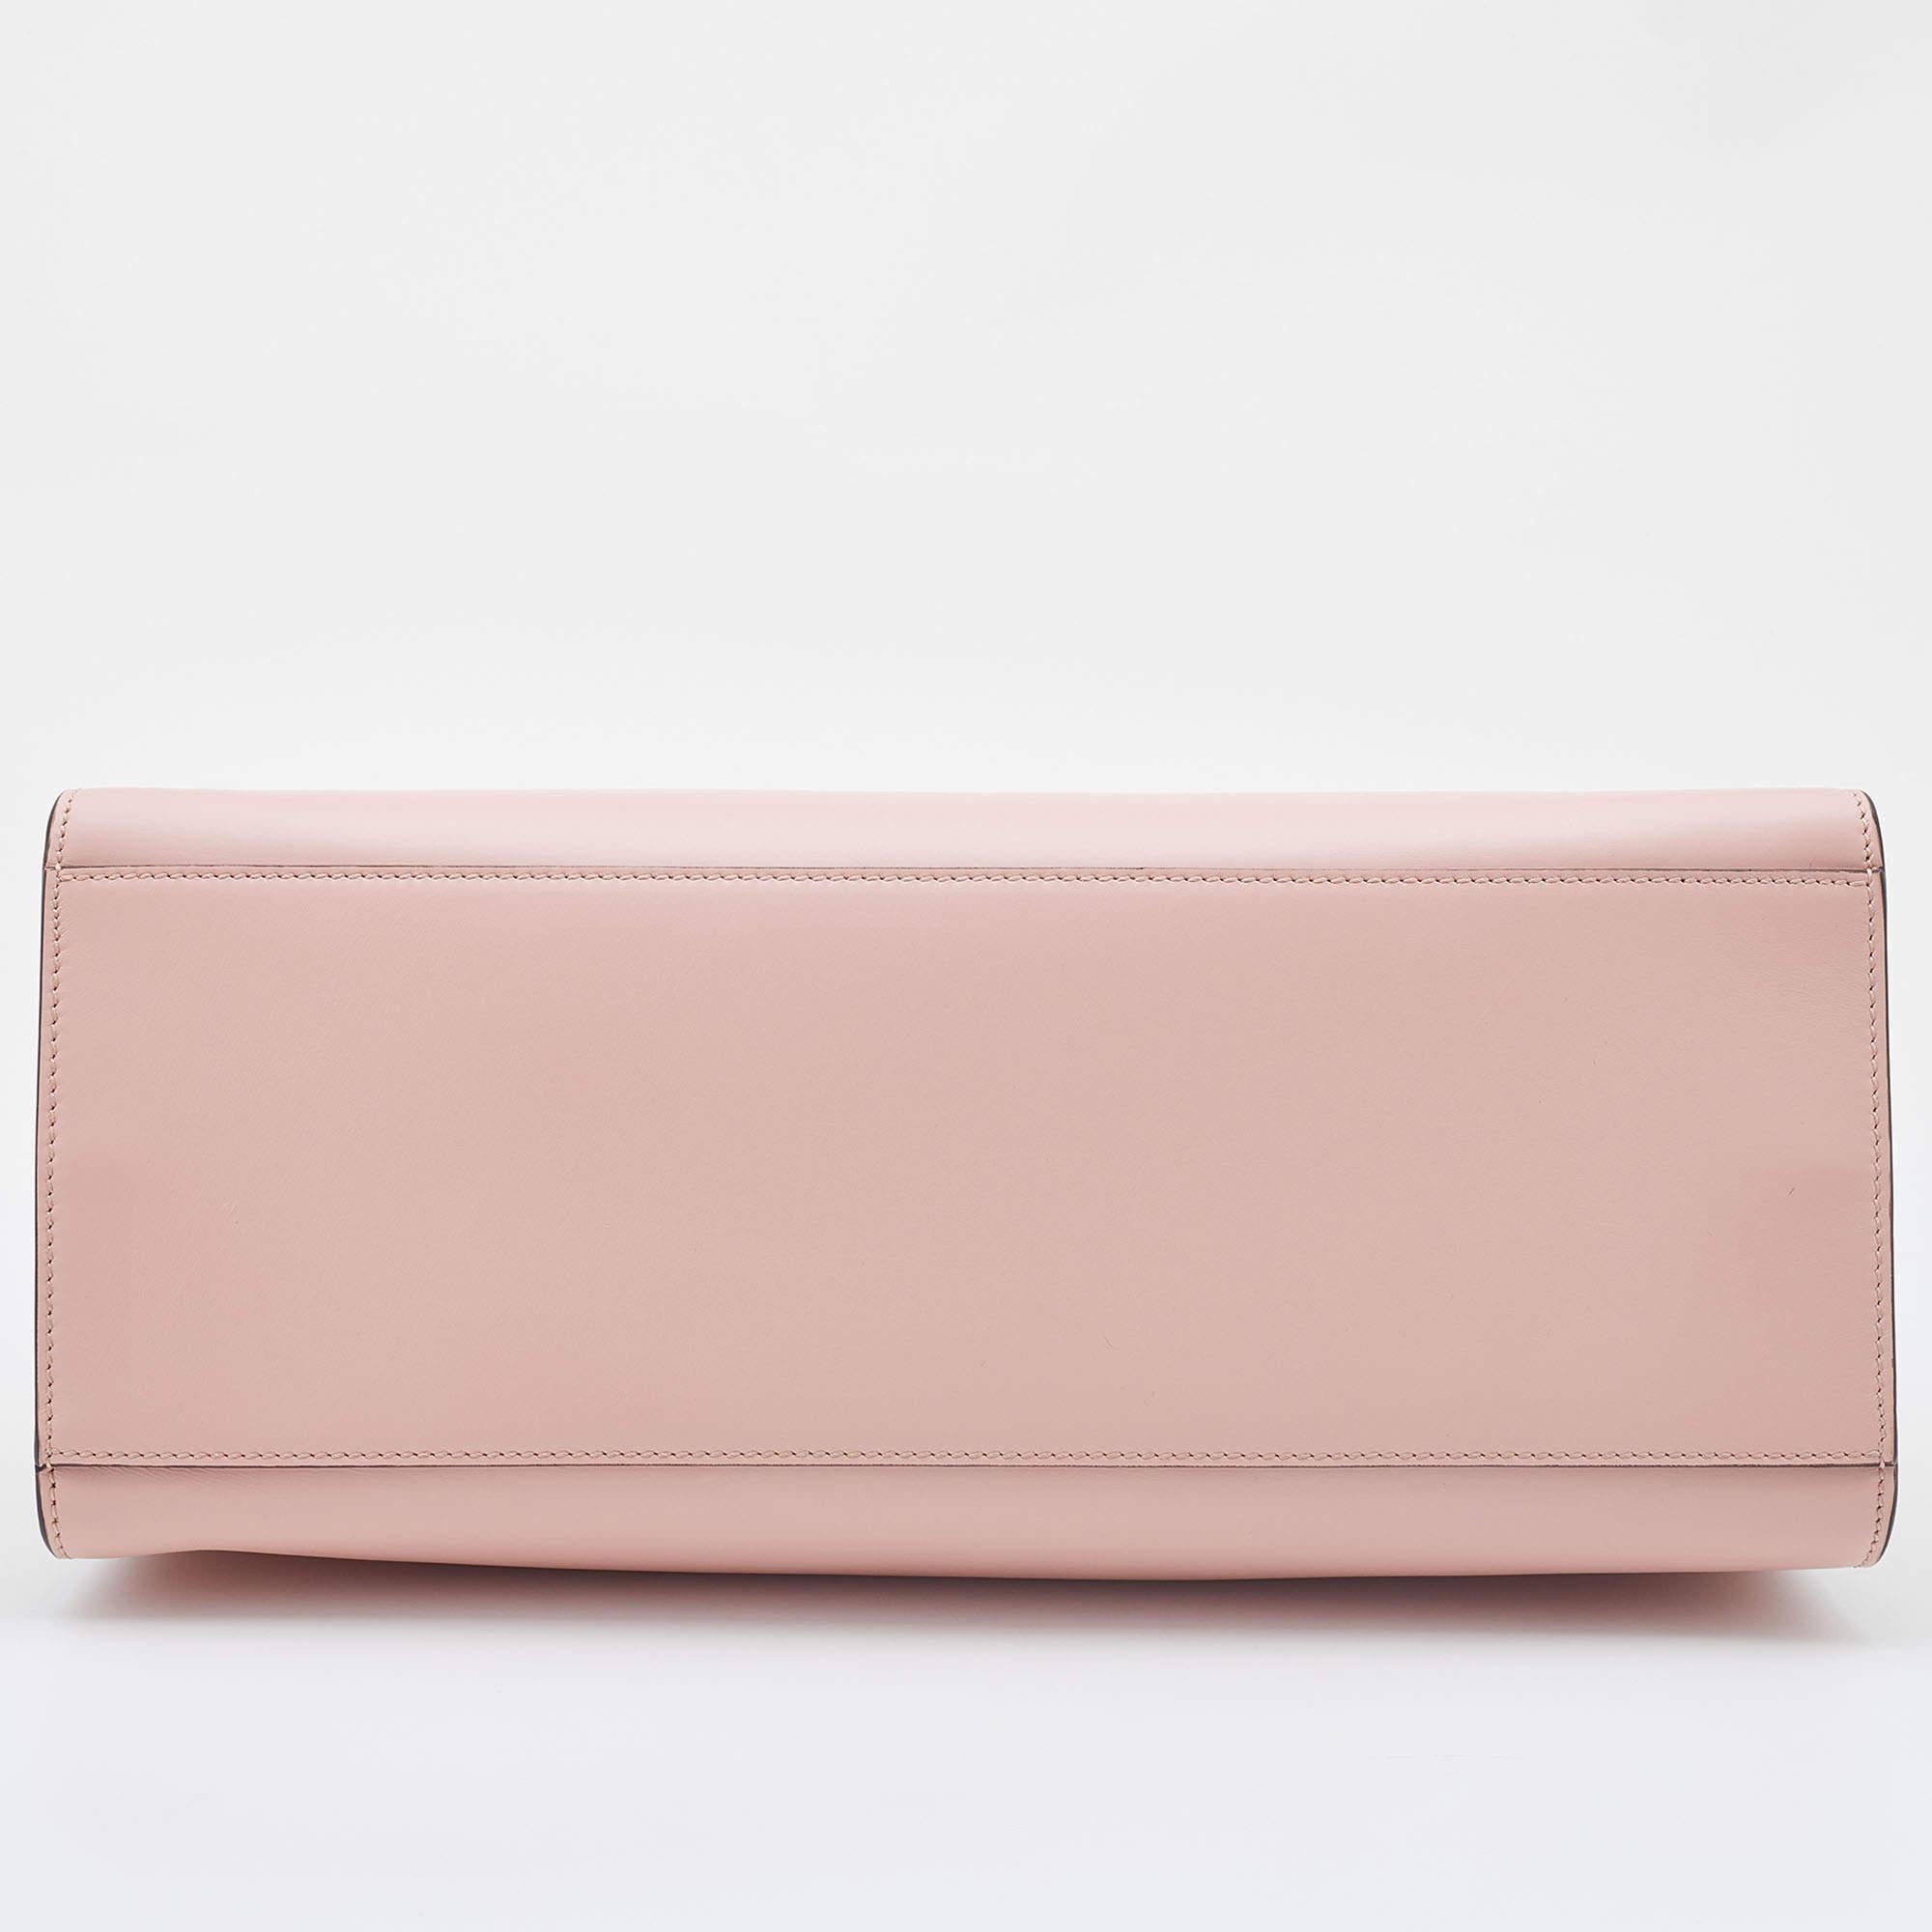 Gucci Pink/White Leather Nymphaea Bamboo Top Handle Bag 1